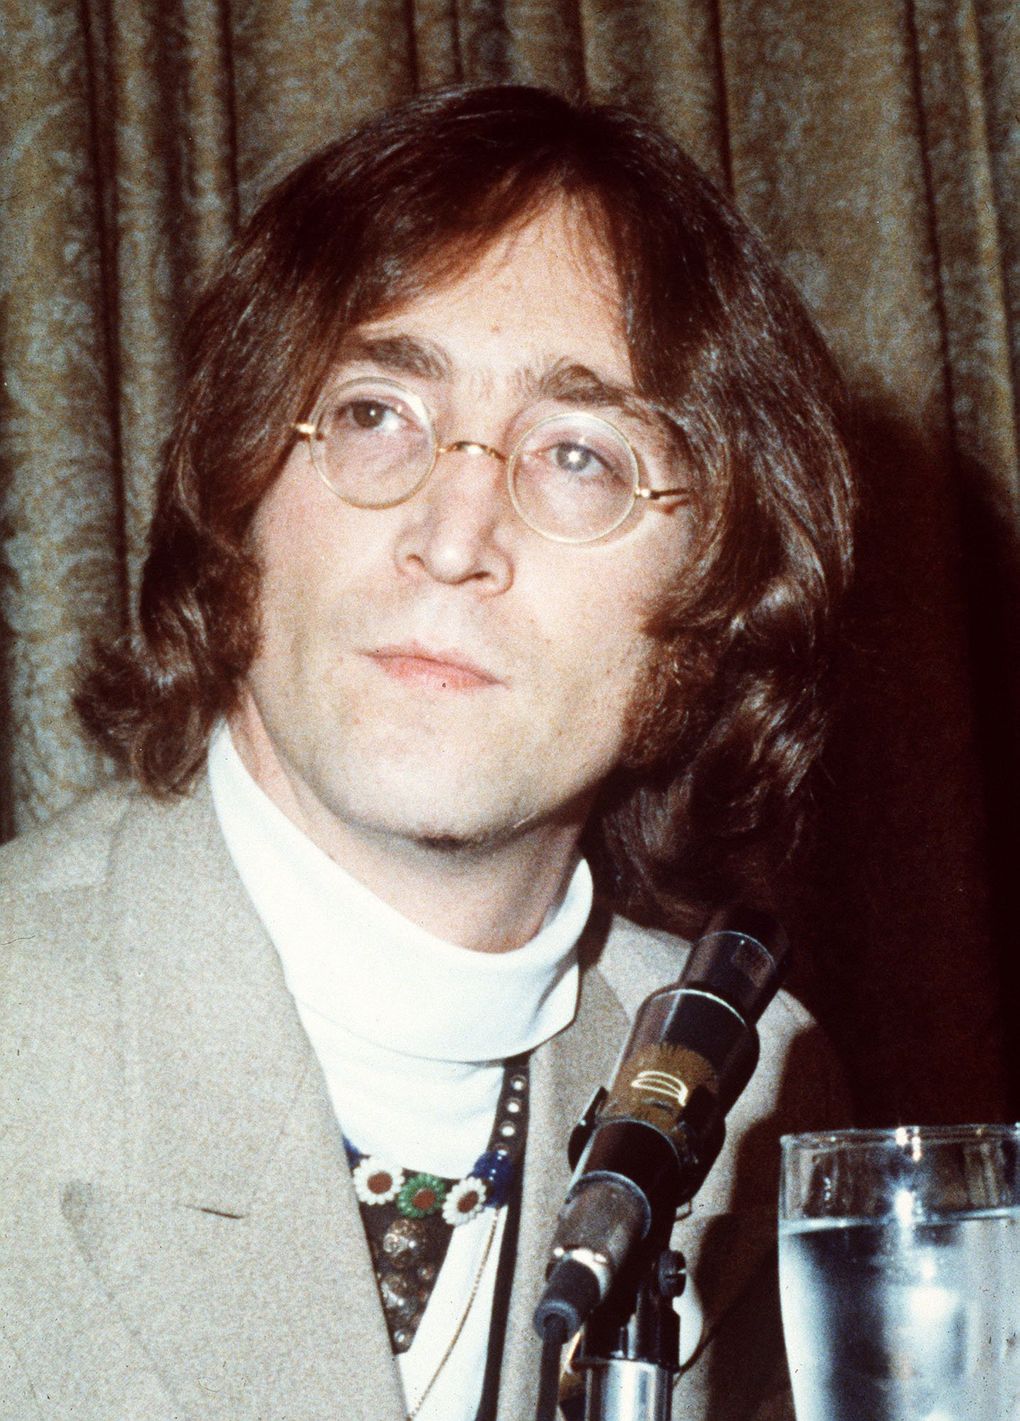 John Lennon Woman I know you understand.